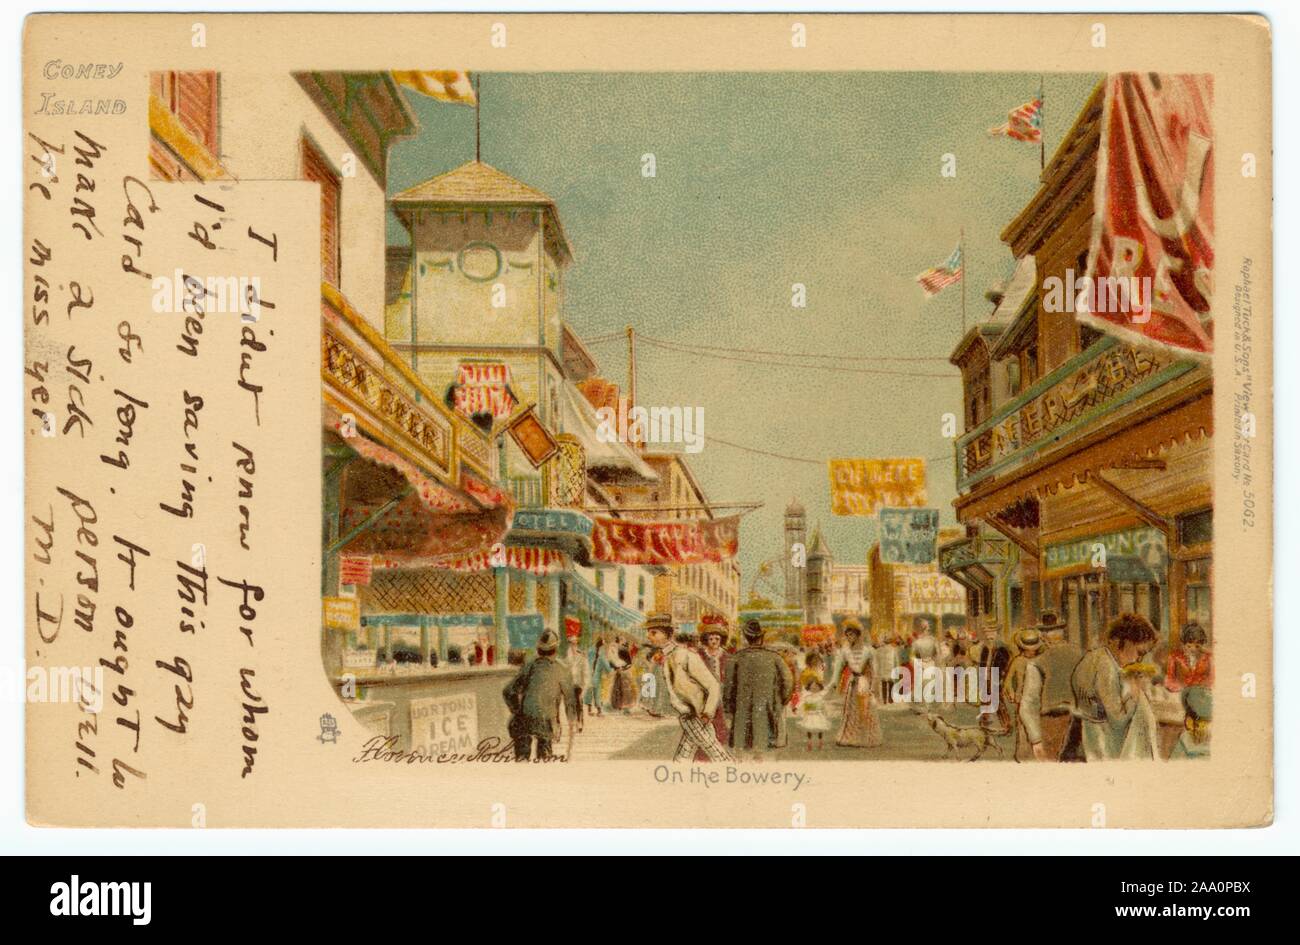 Illustrated postcard of a busy street in the Bowery area, Coney Island, New York City, copyright by Florence Robinson, published by Raphael Tuck and Sons, 1904. From the New York Public Library. () Stock Photo